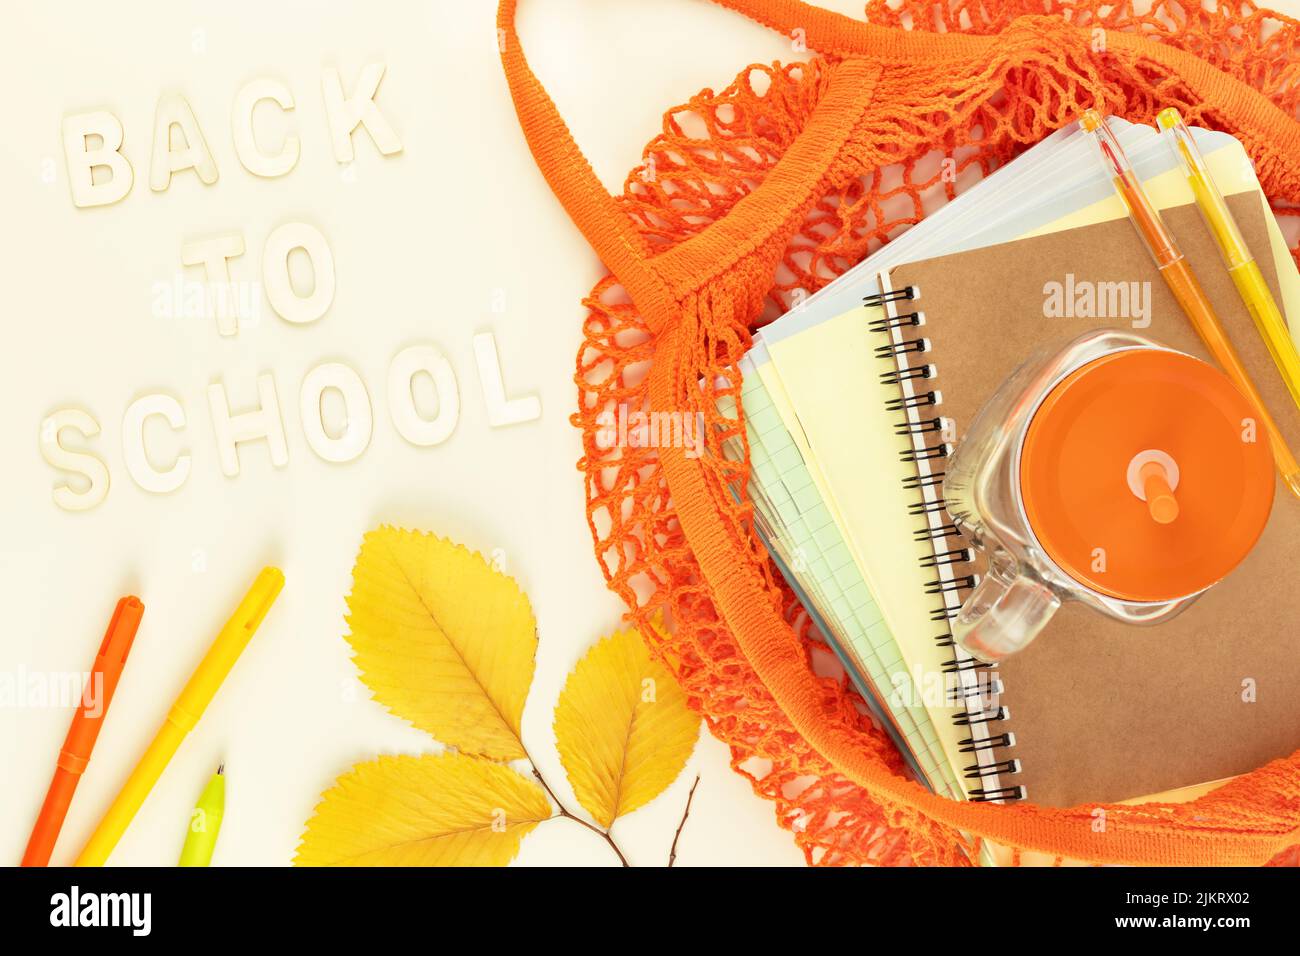 Card of Back to school. Eco friendly, School sale concept. School supplies in a bright yellow textile bag on a light background with autumn leaves and Stock Photo